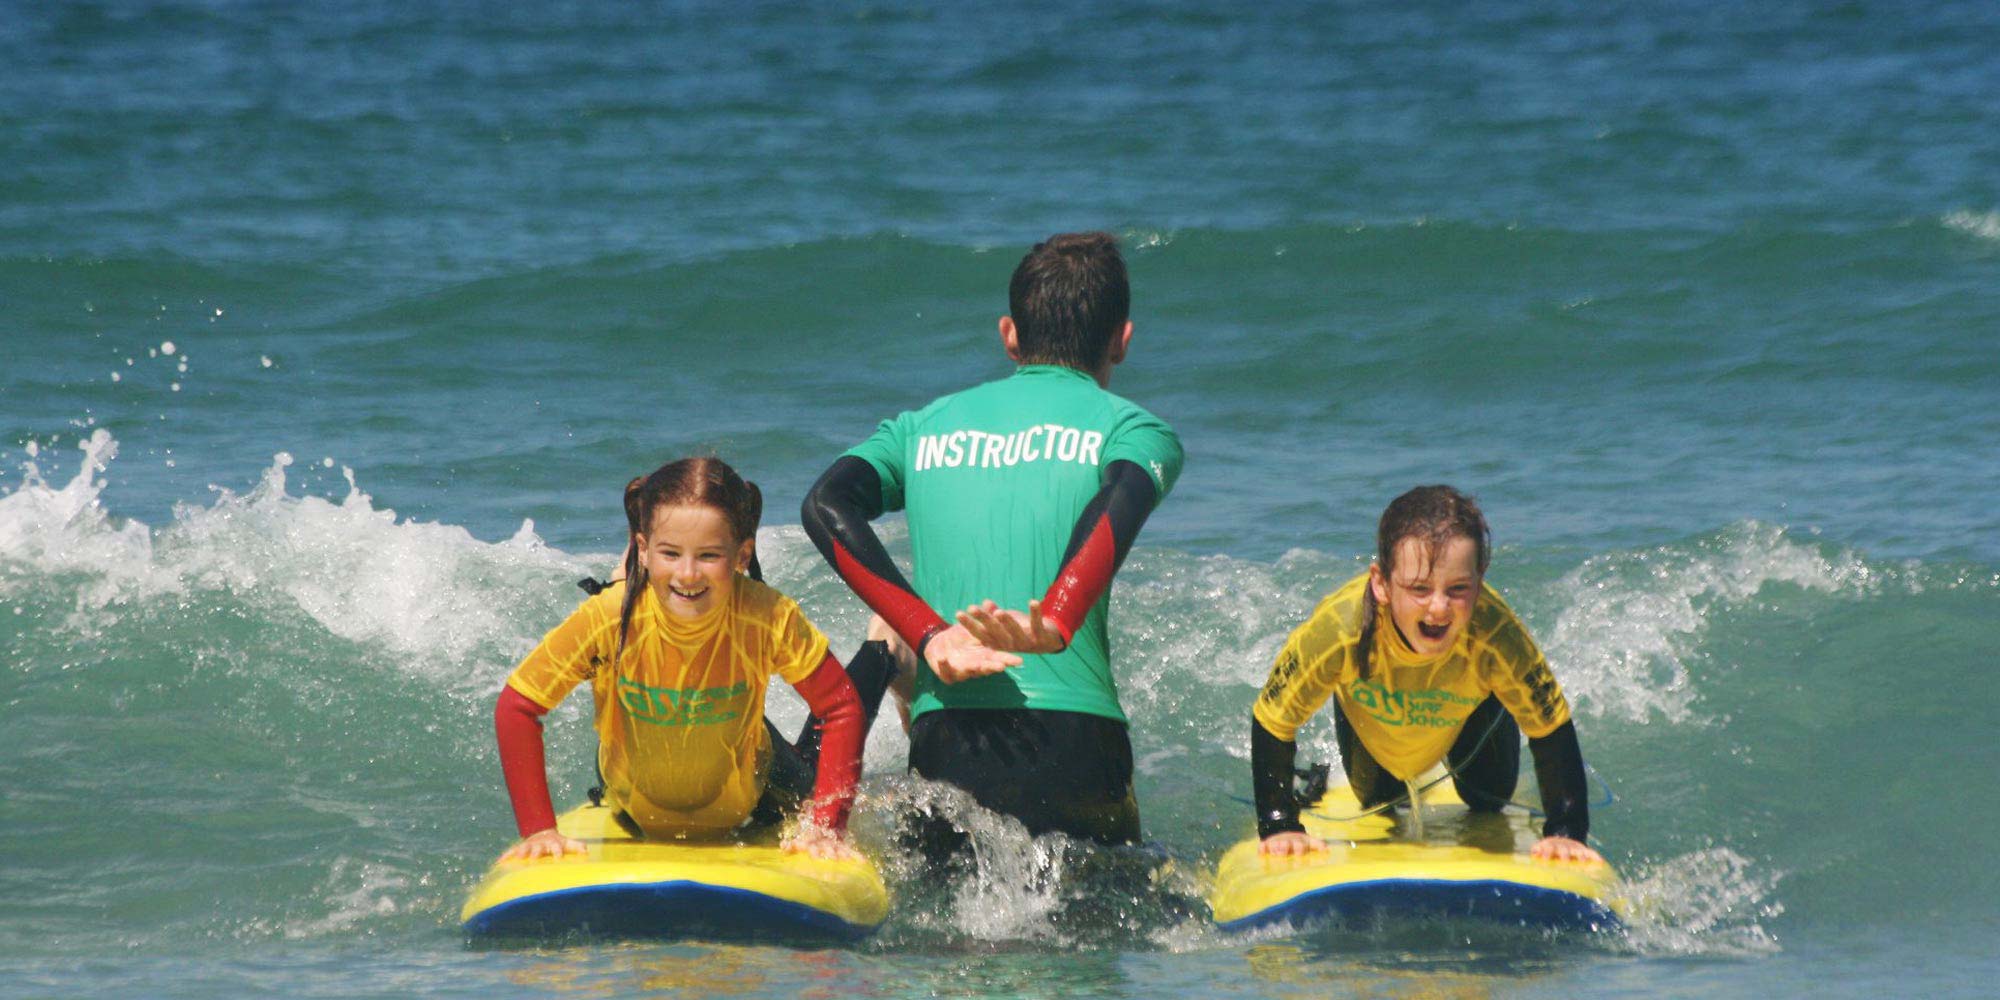 Contact the Guernsey surf school today, we look forward to hearing from you.